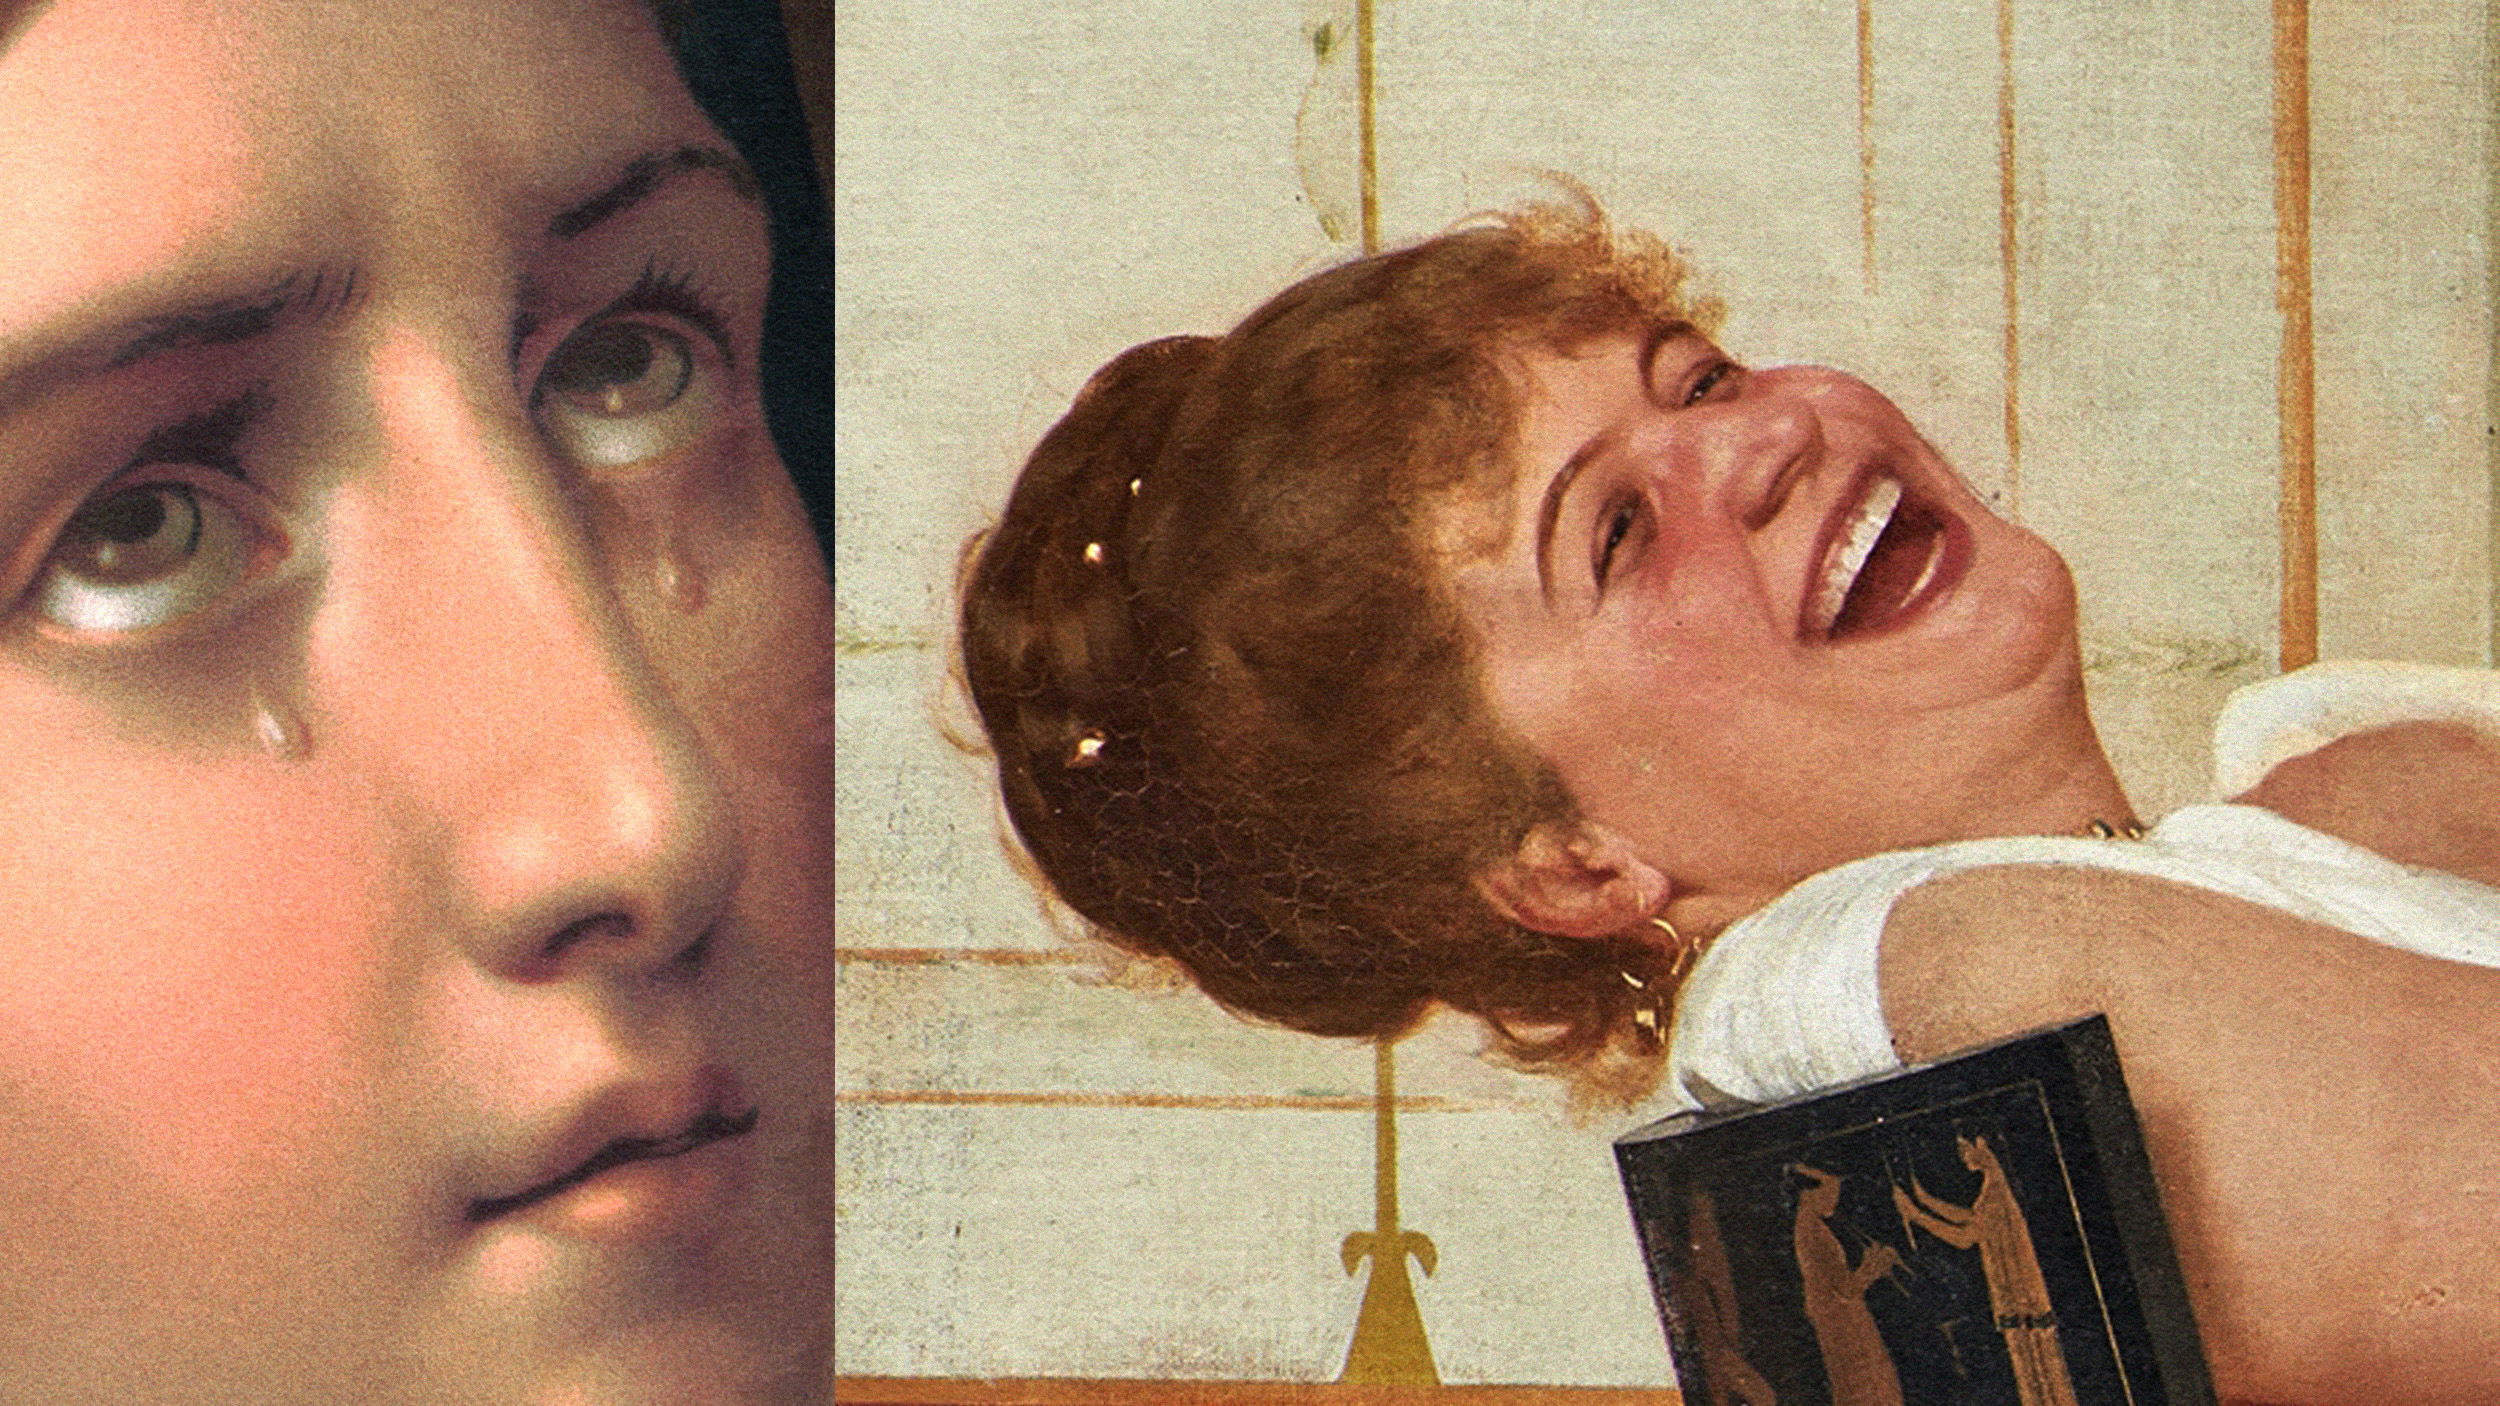 An image contrasts two emotions: the left side shows a close-up of a tearful face, while the right side depicts a woman immersed in laughter.